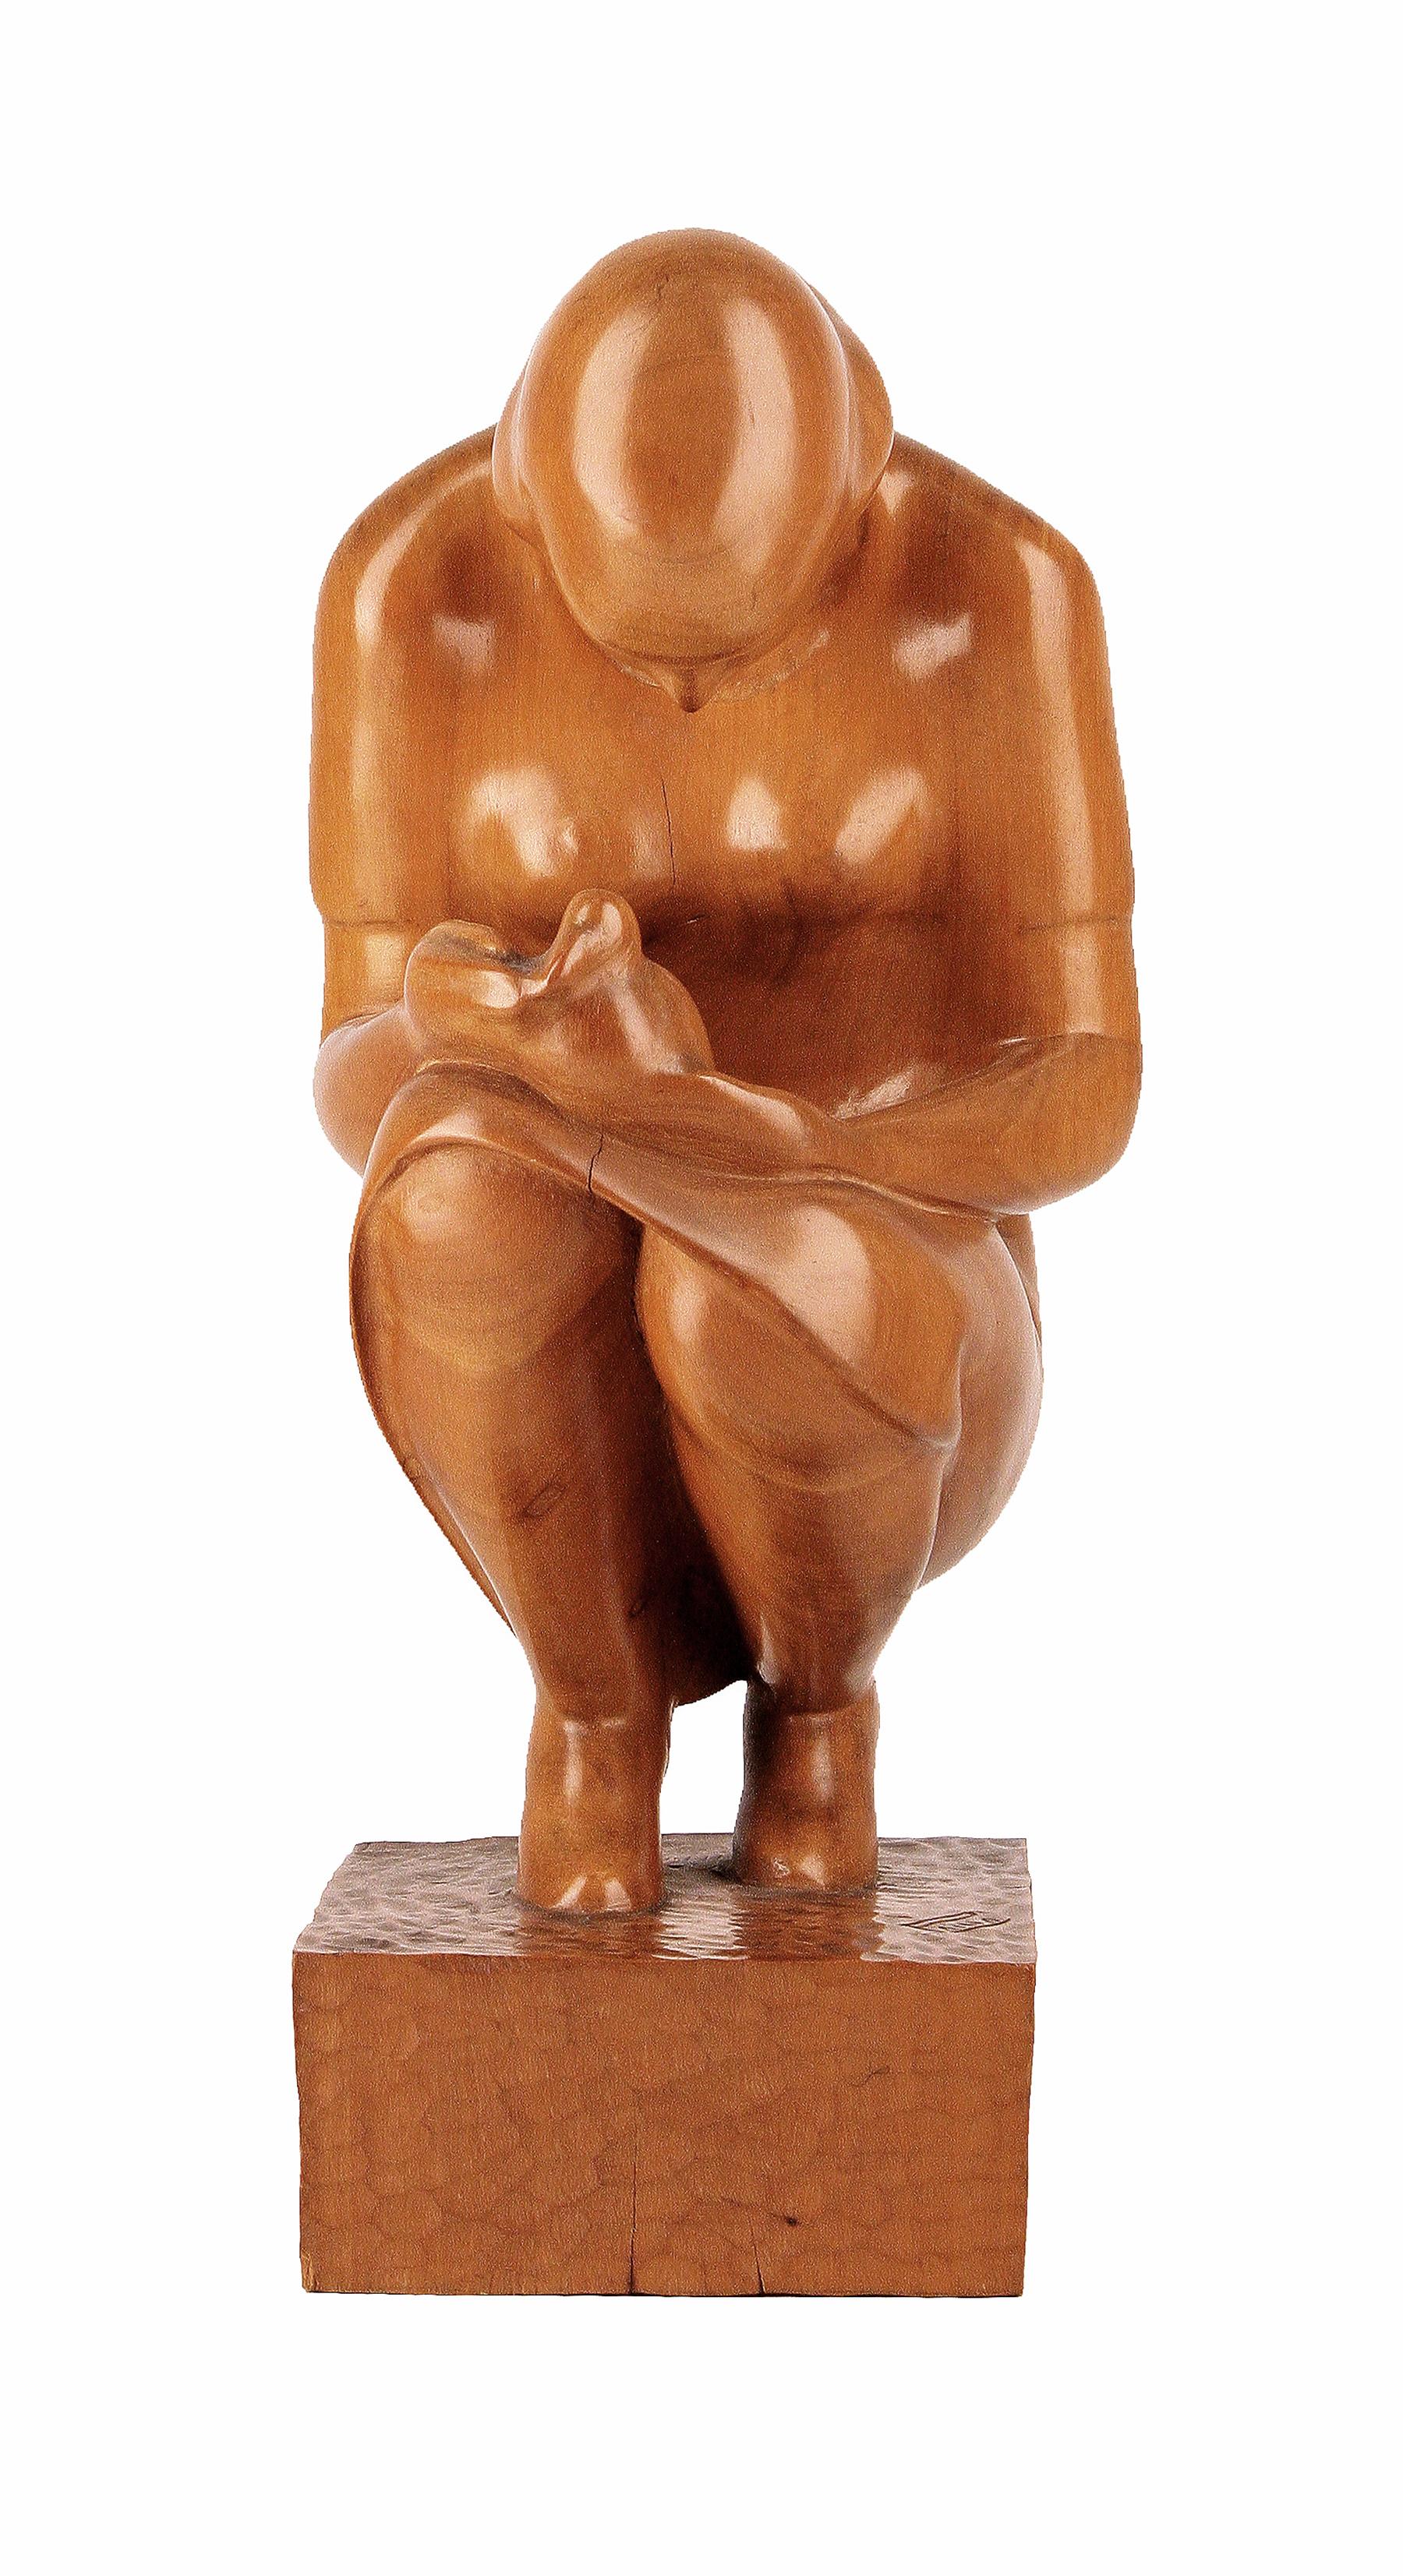 Mid-20th century varnished wood sculpture of crouched lady by spanish author Godofredo Paino

By: Godofredo Paino
Material: wood
Technique: varnished, carved, hand-carved, hand-crafted
Dimensions: 6 in x 5.5 in x 13 in
Date: mid-20th century
Style: